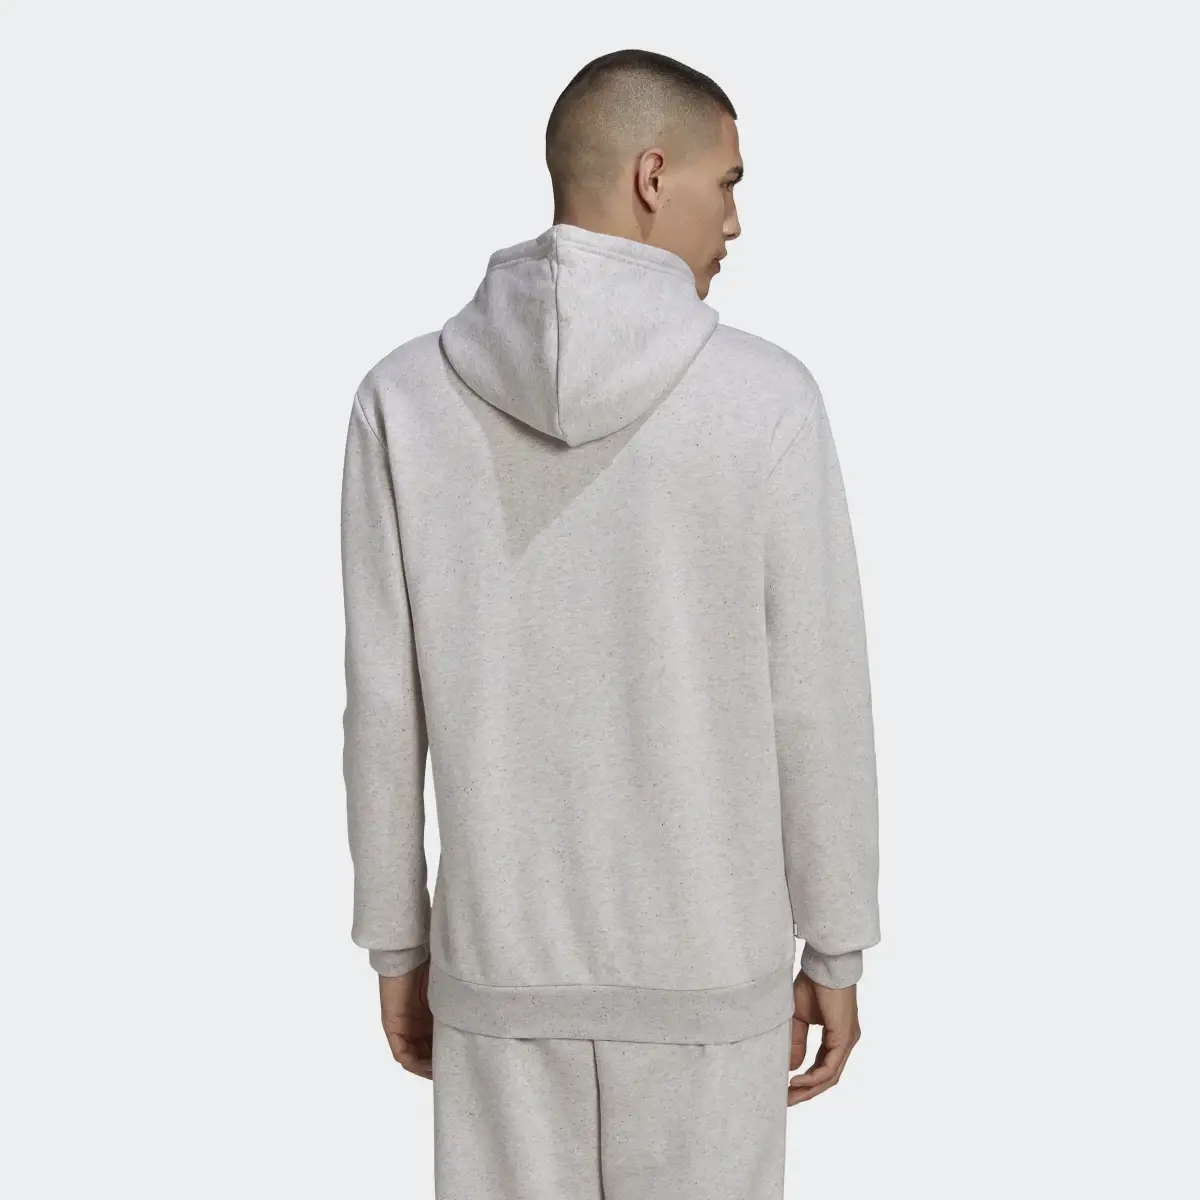 Adidas Essentials+ Made with Nature Hoodie. 3